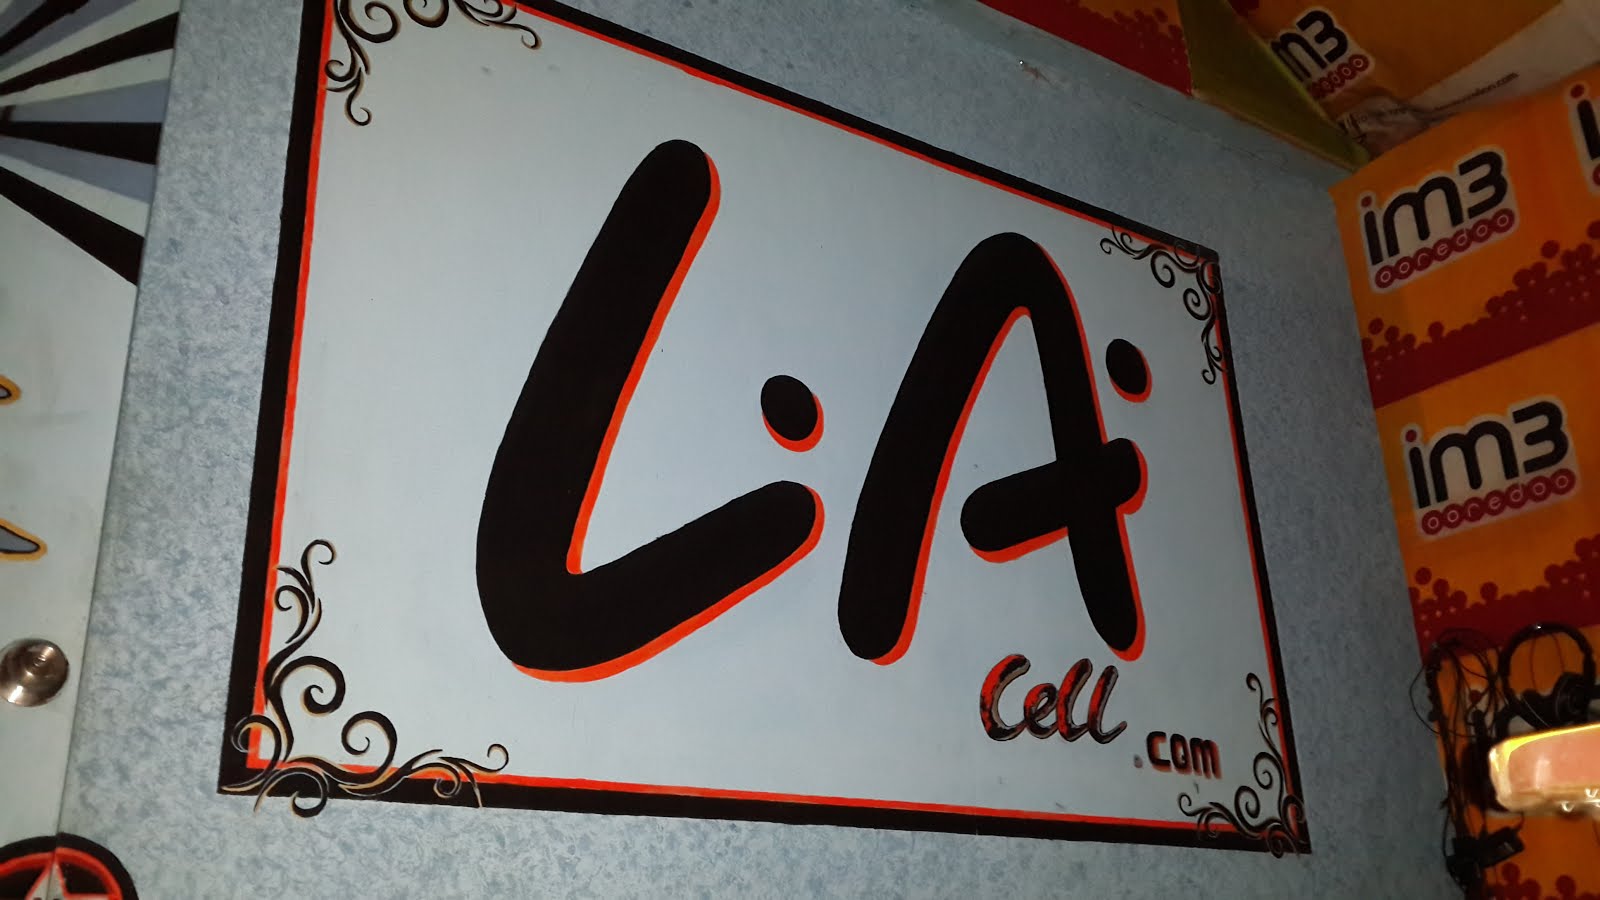 L.A. Cell